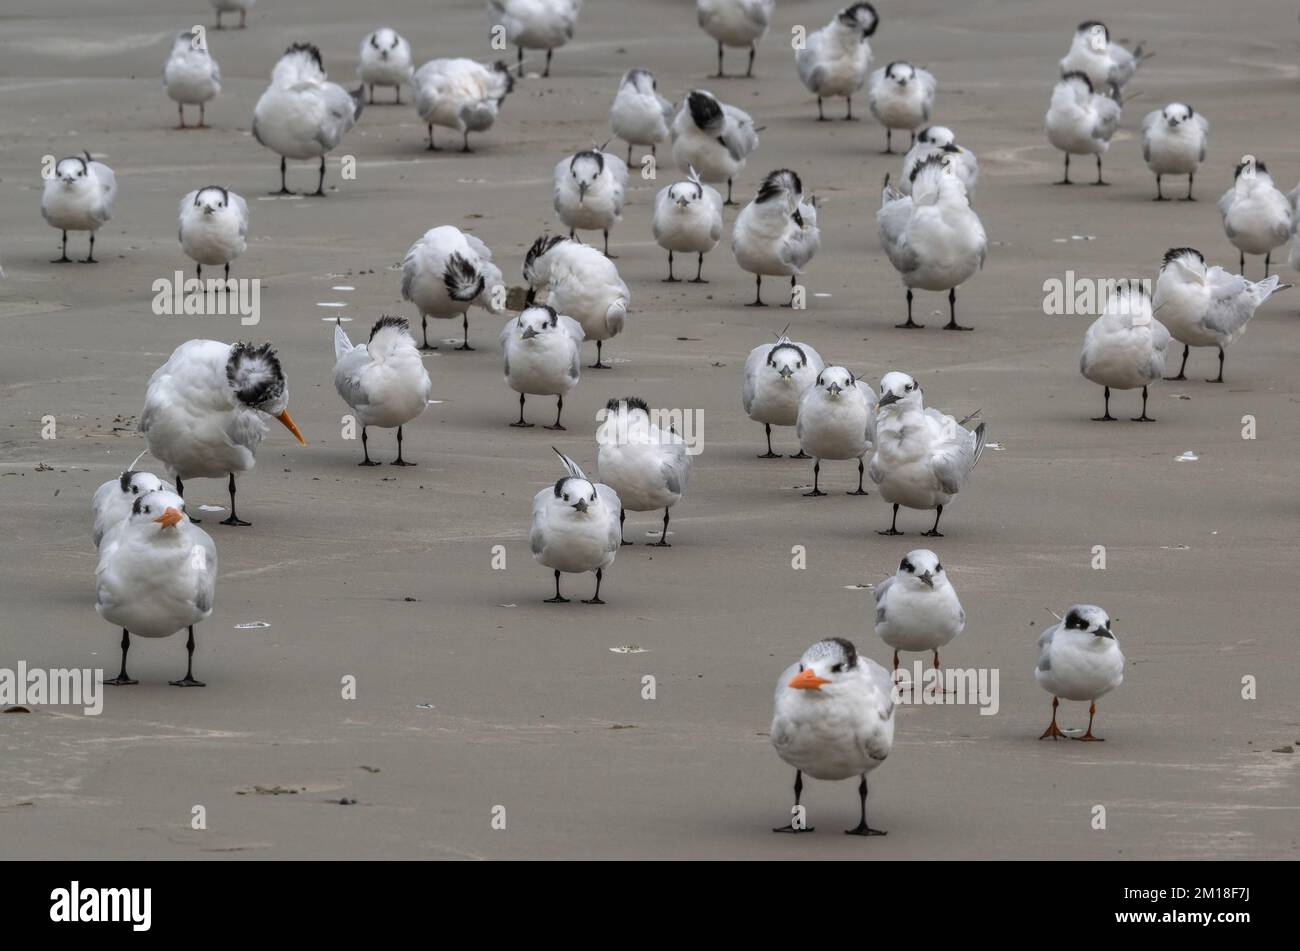 Resting group of wintering terns on sandy beach - Sandwich tern, Royal tern, and Forster's tern; Gulf of Mexico, Texas. Stock Photo